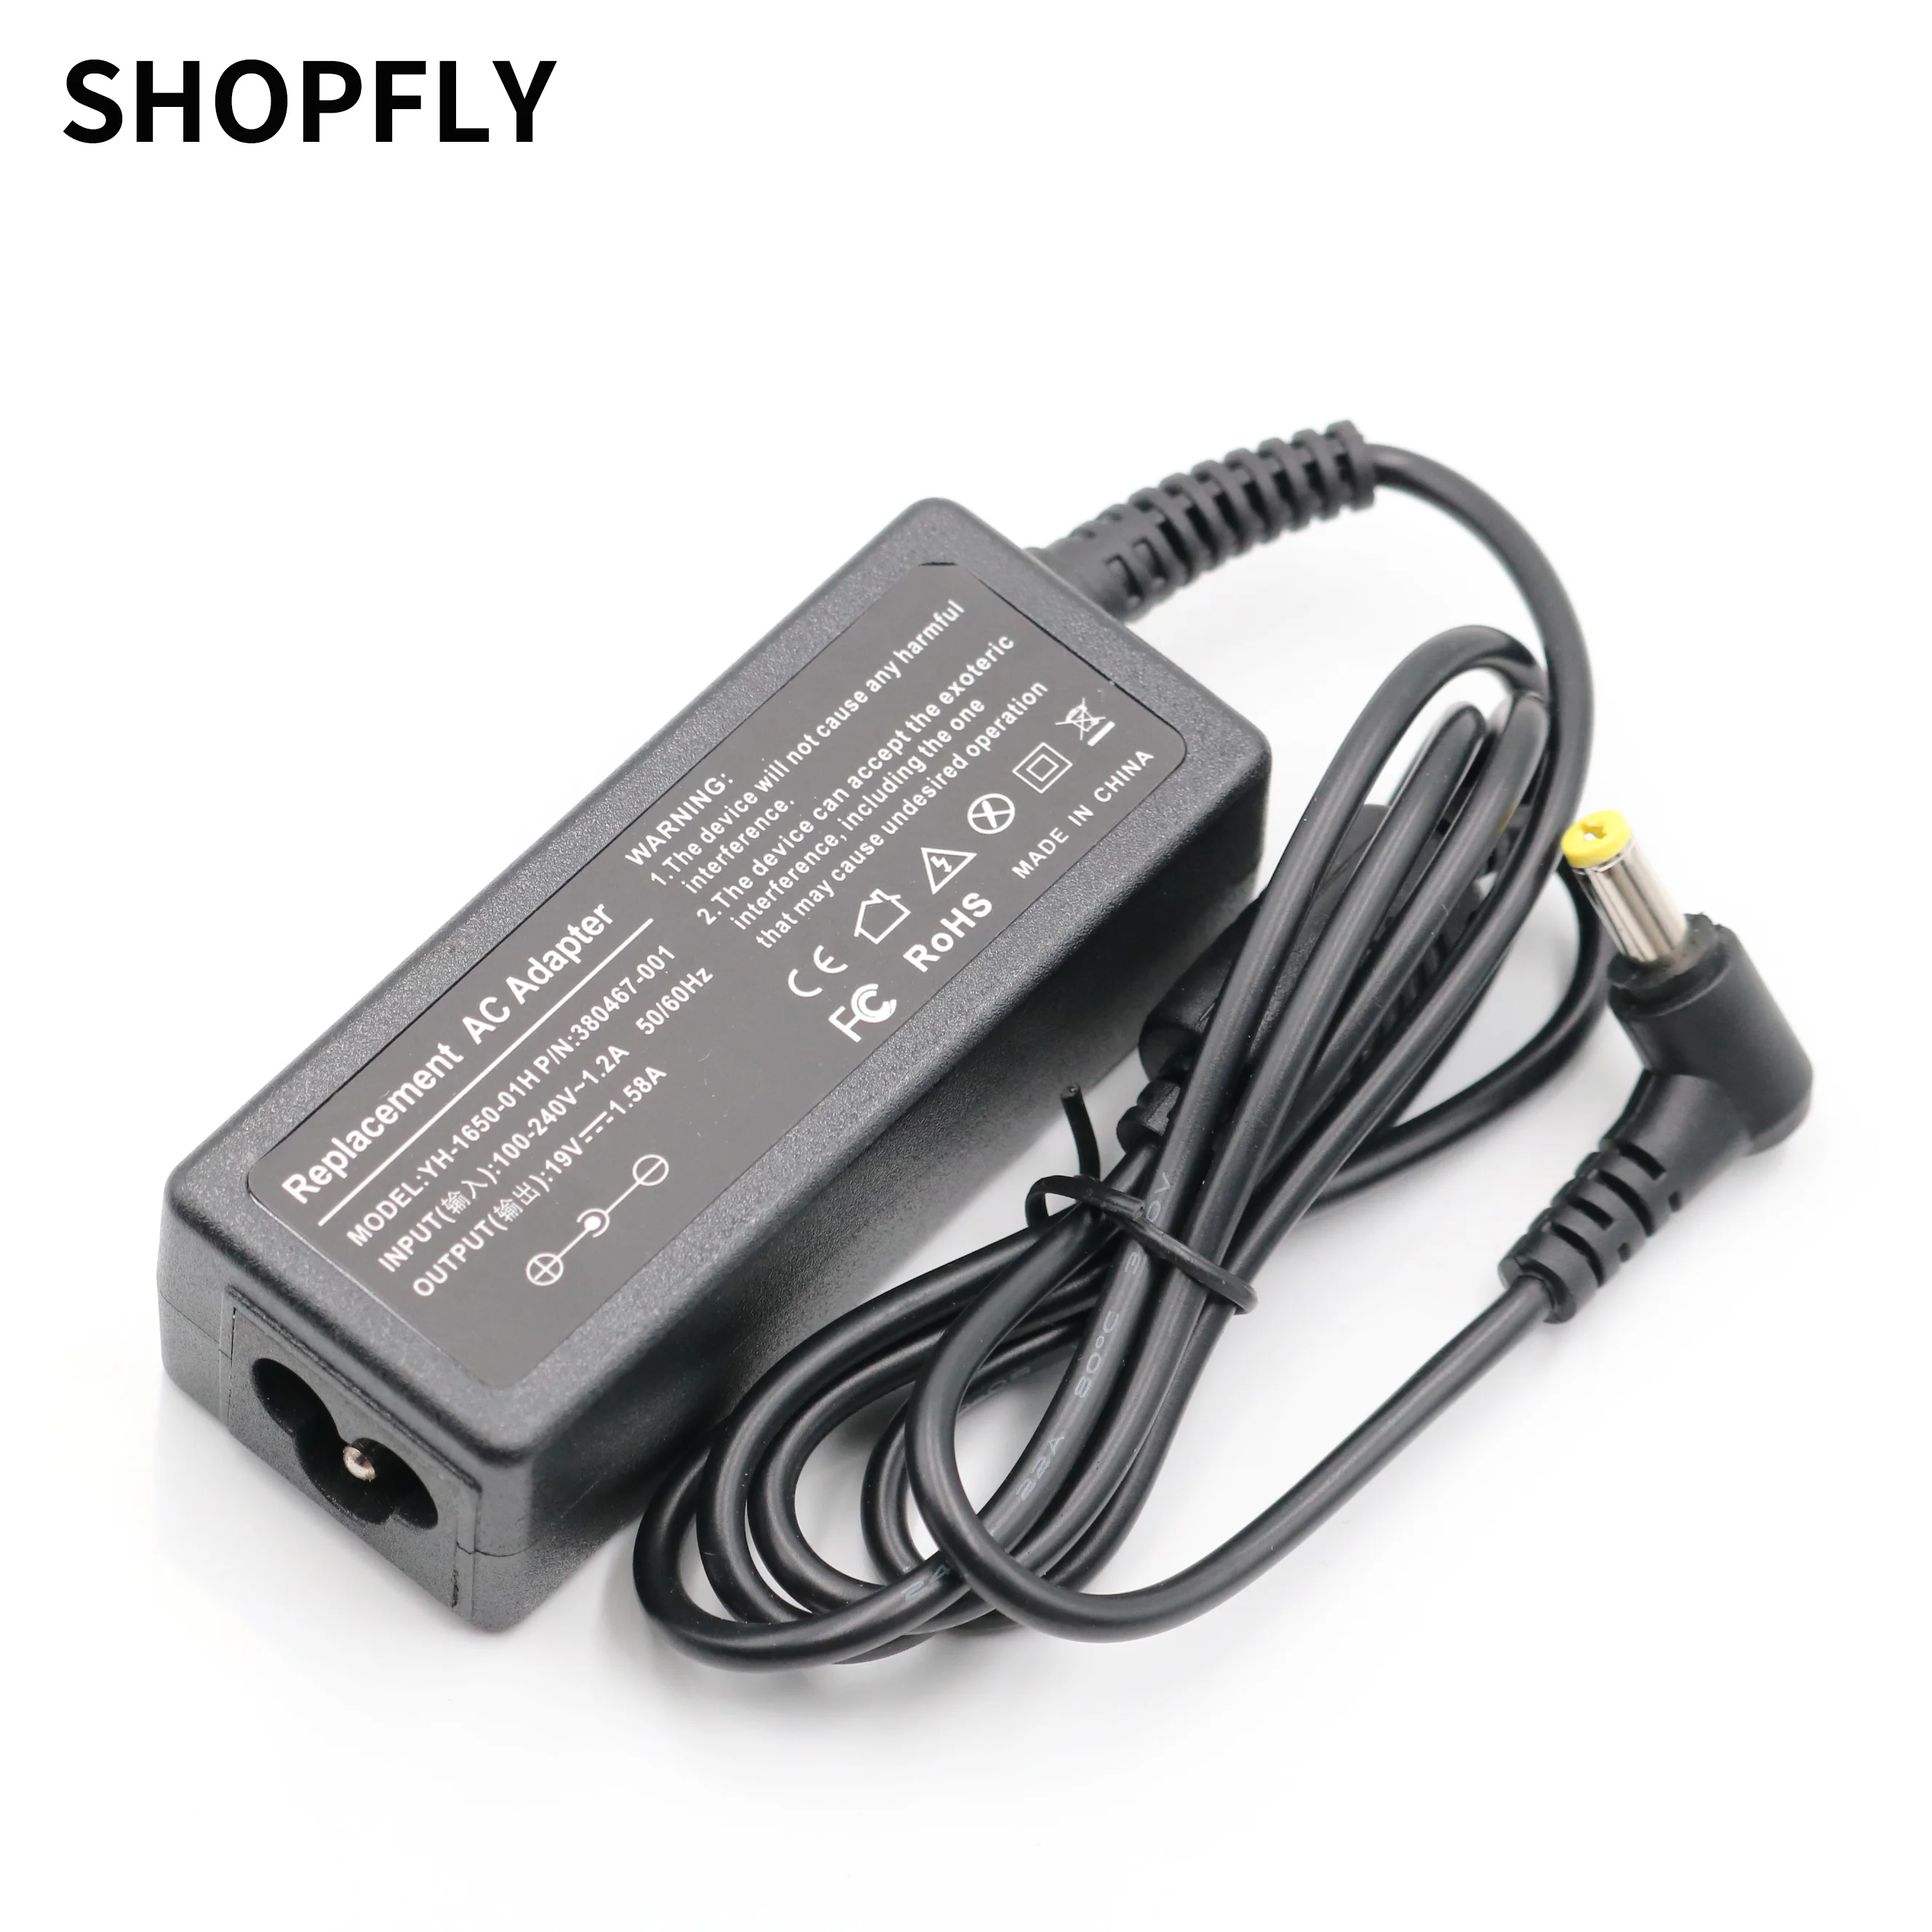 

19V 1.58A AC Adapter Charger For Acer Aspire Power Supply Charger Laptop Charger Adapter Netbook Charger Cord 5.5*1.7mm